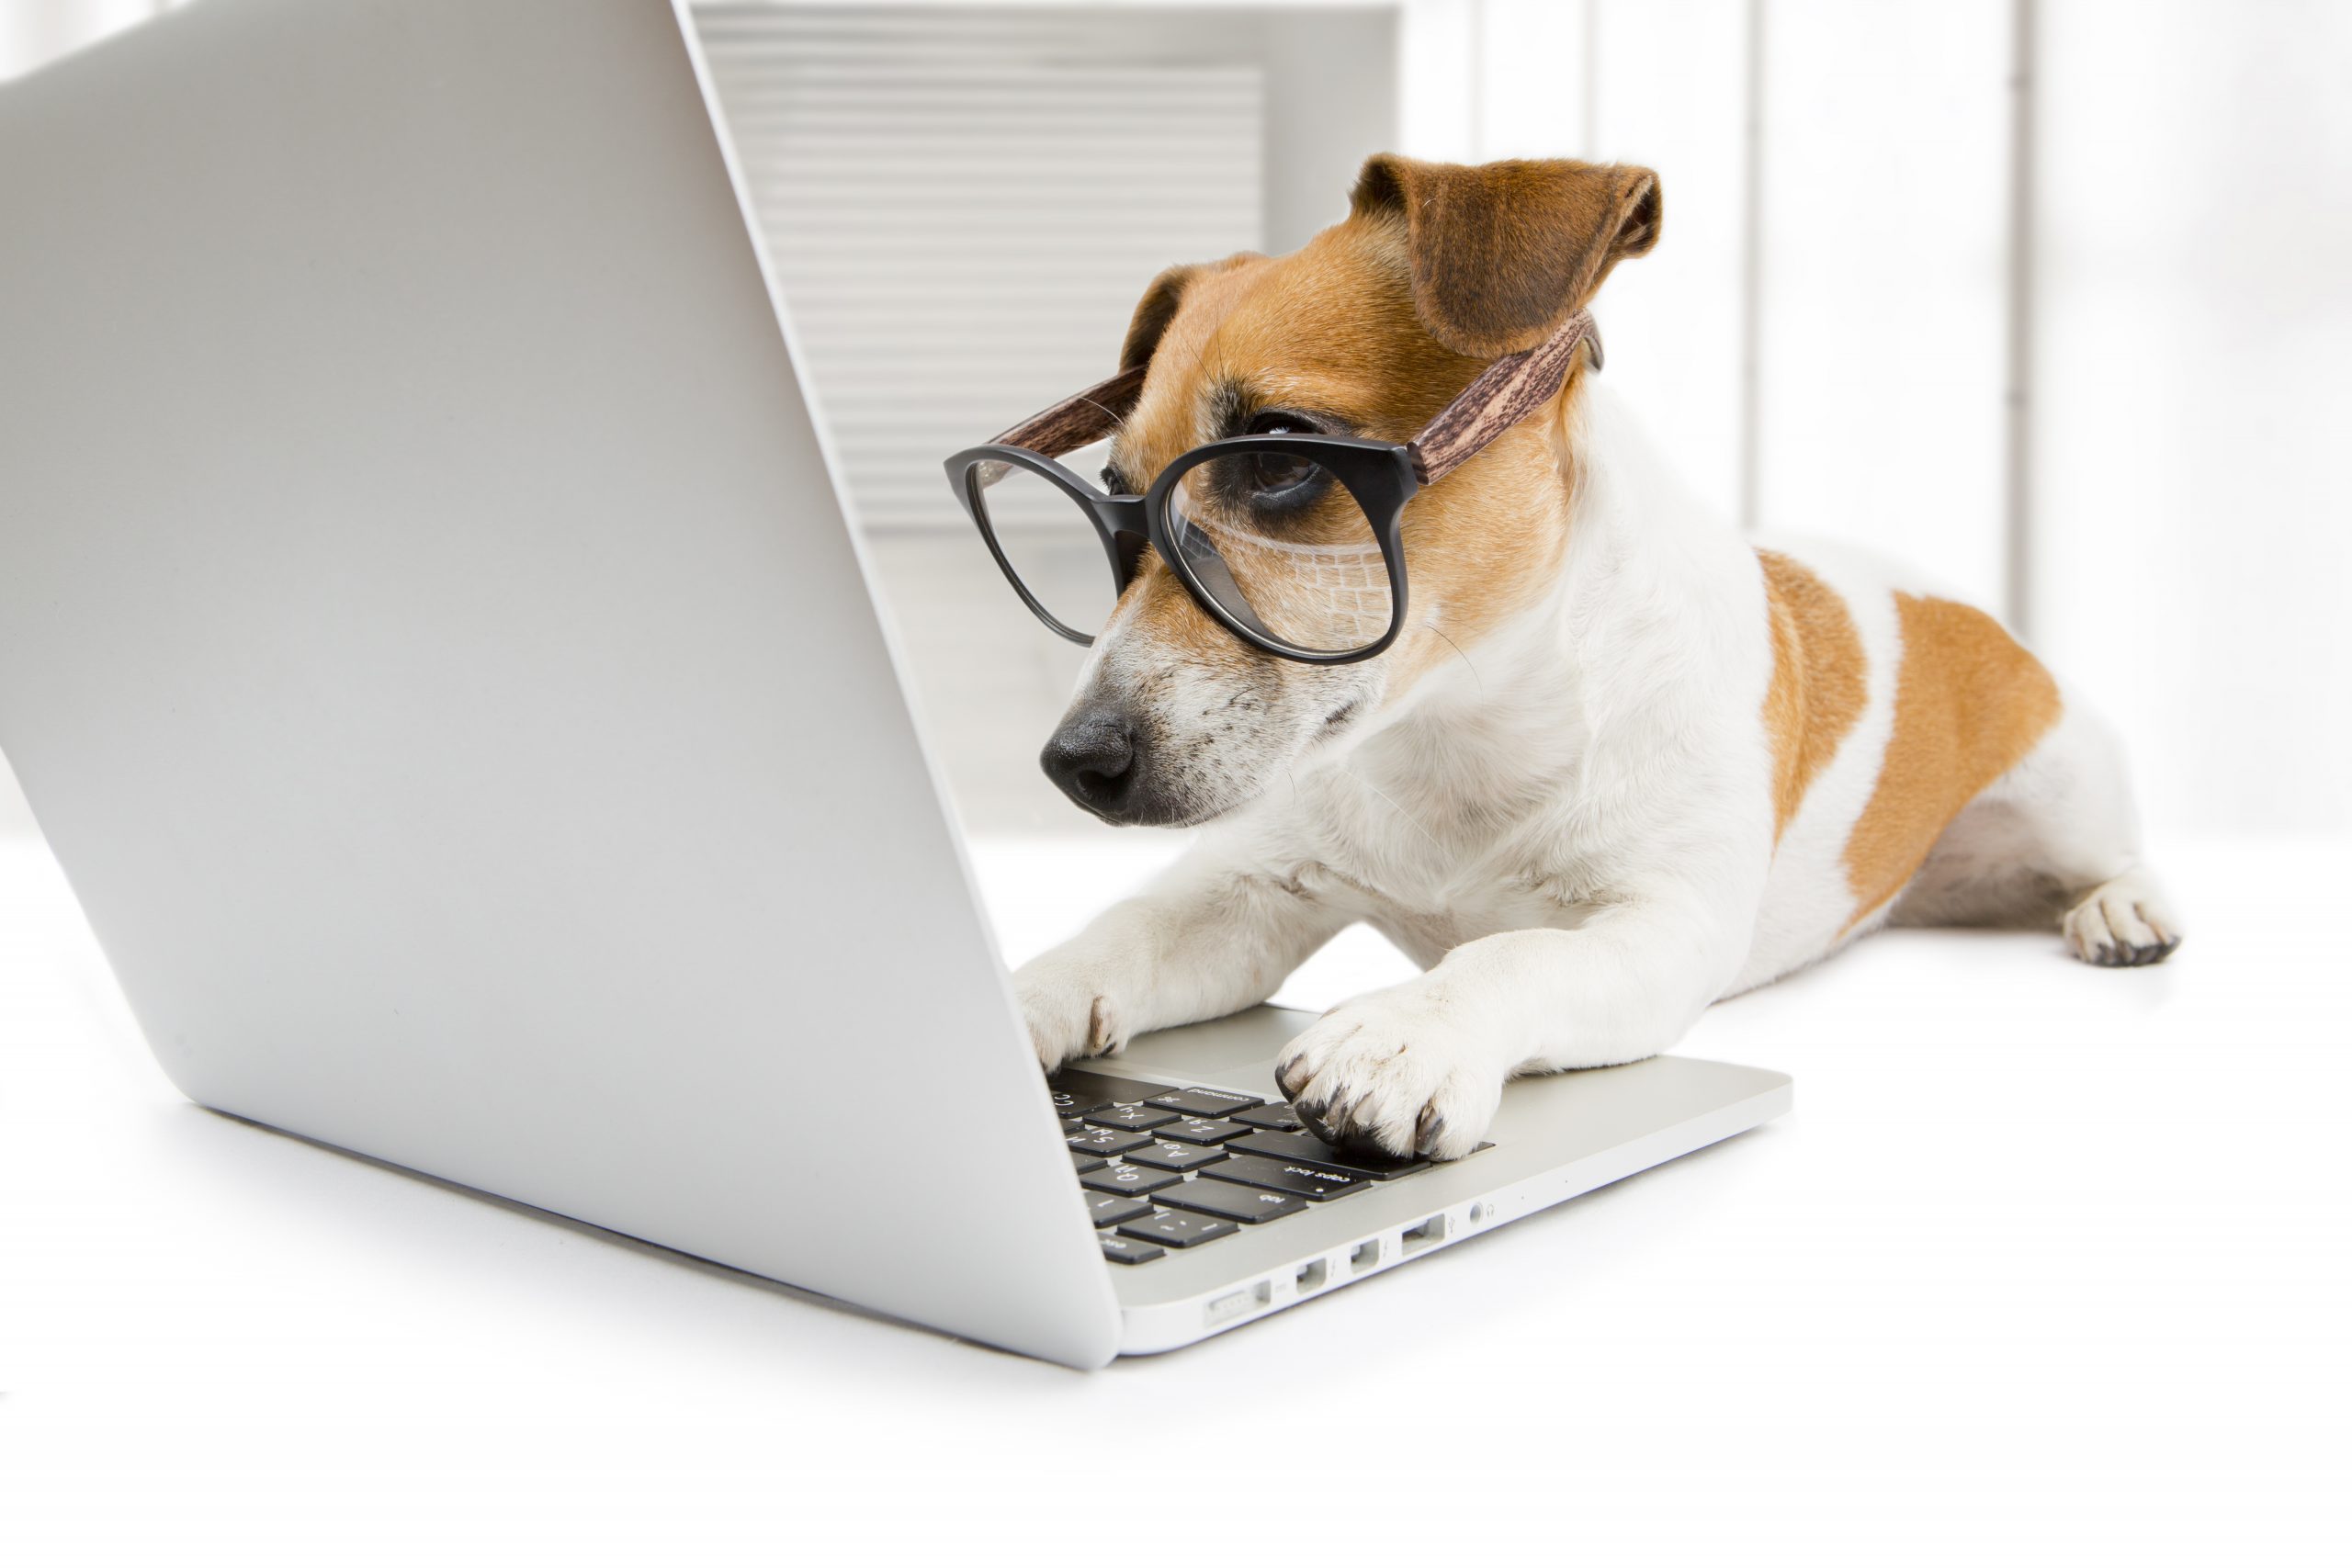 Clever-looking dog at a computer